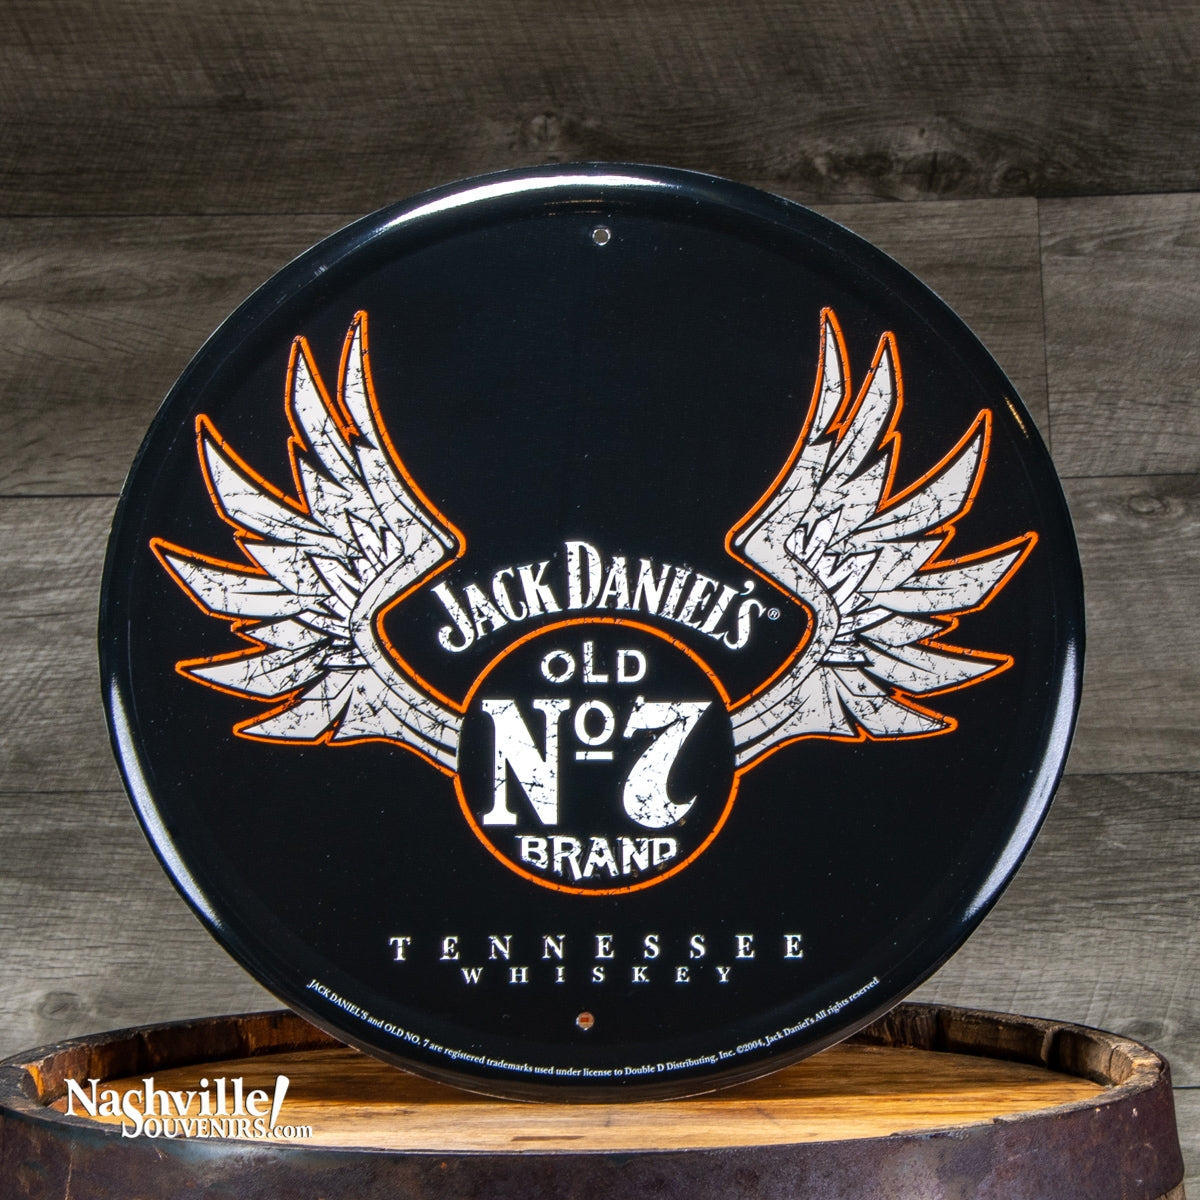 Vintage Jack Daniels anyone? Hang a great Jack Daniels Old No 7 Brand Tin Sign in a premium spot in the man cave for all to enjoy. Great Prices FREE SHIPPING on US orders over $75!